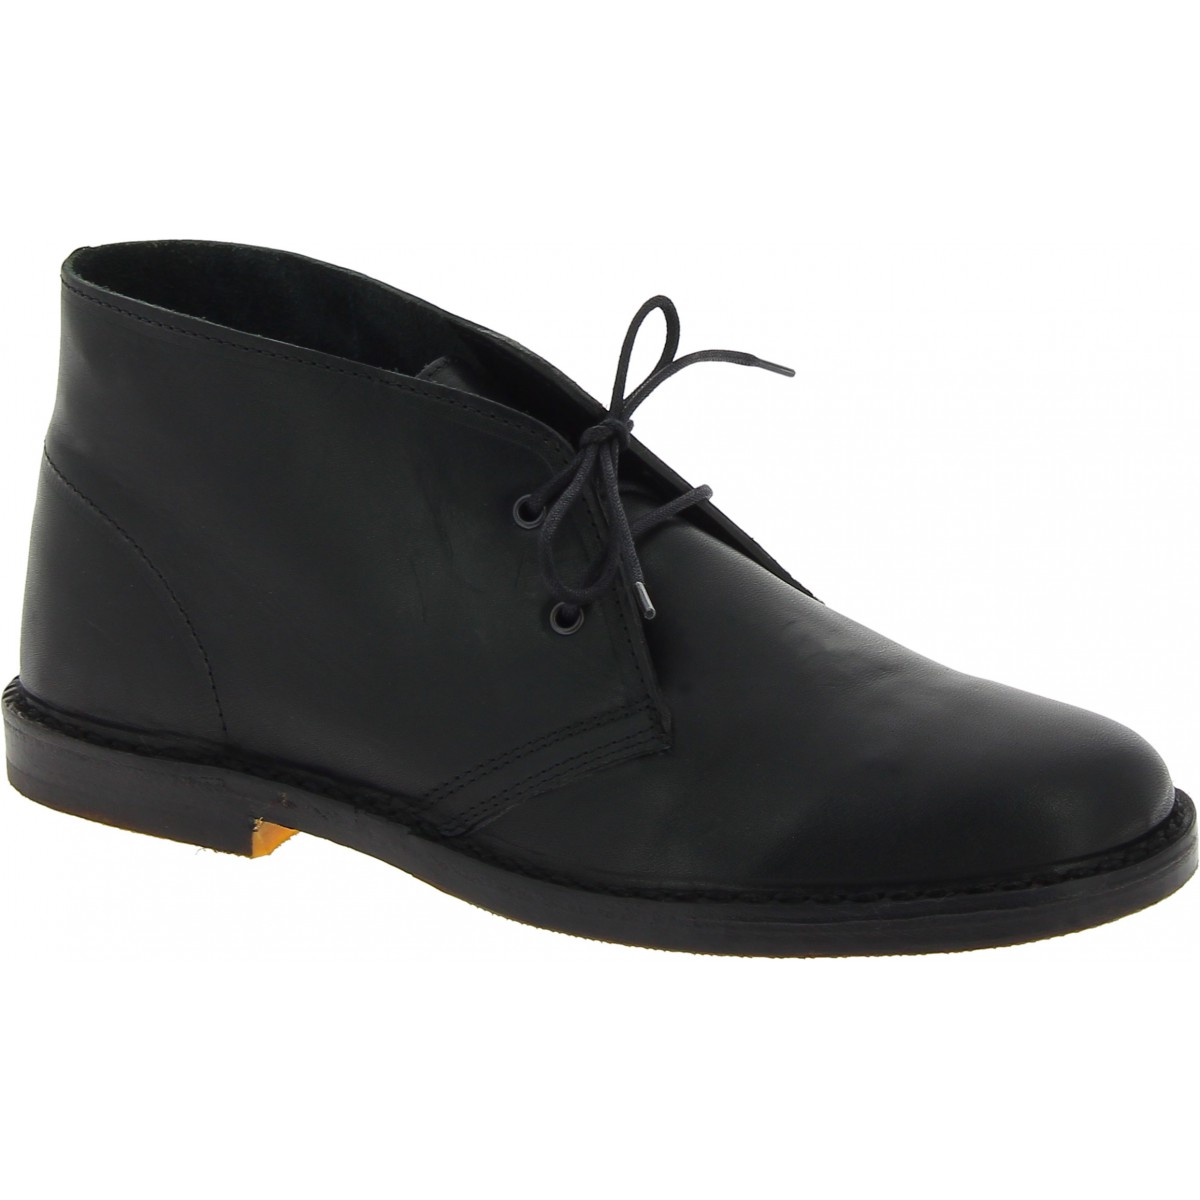 easy to handle Happy exit Men's black leather chukka boots handmade in Italy | The leather craftsmen